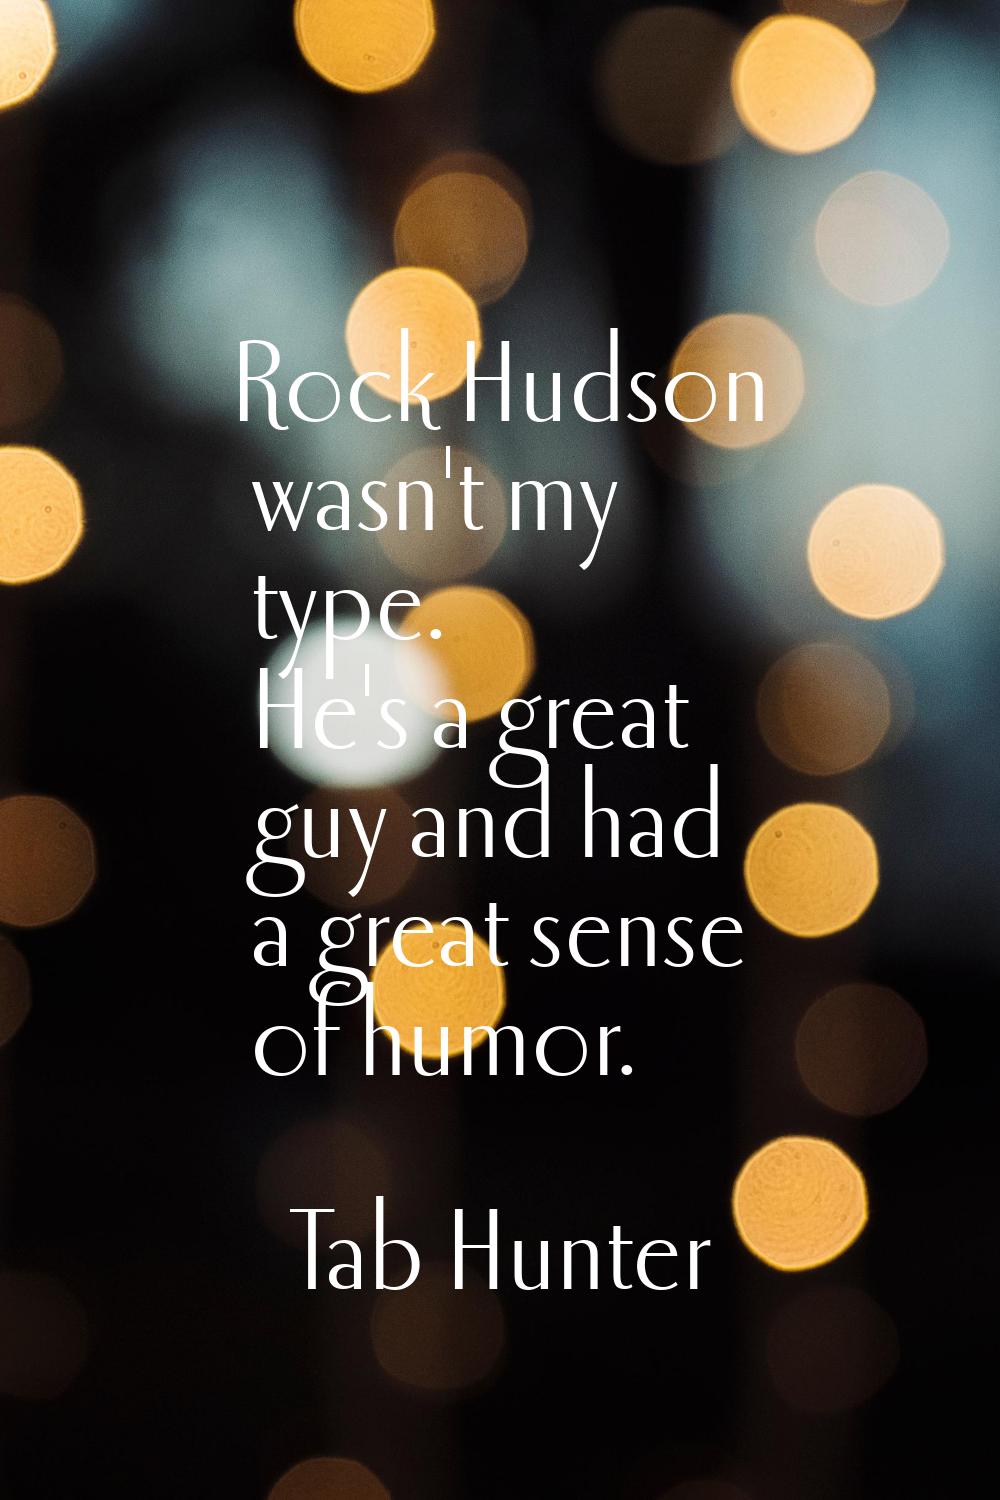 Rock Hudson wasn't my type. He's a great guy and had a great sense of humor.